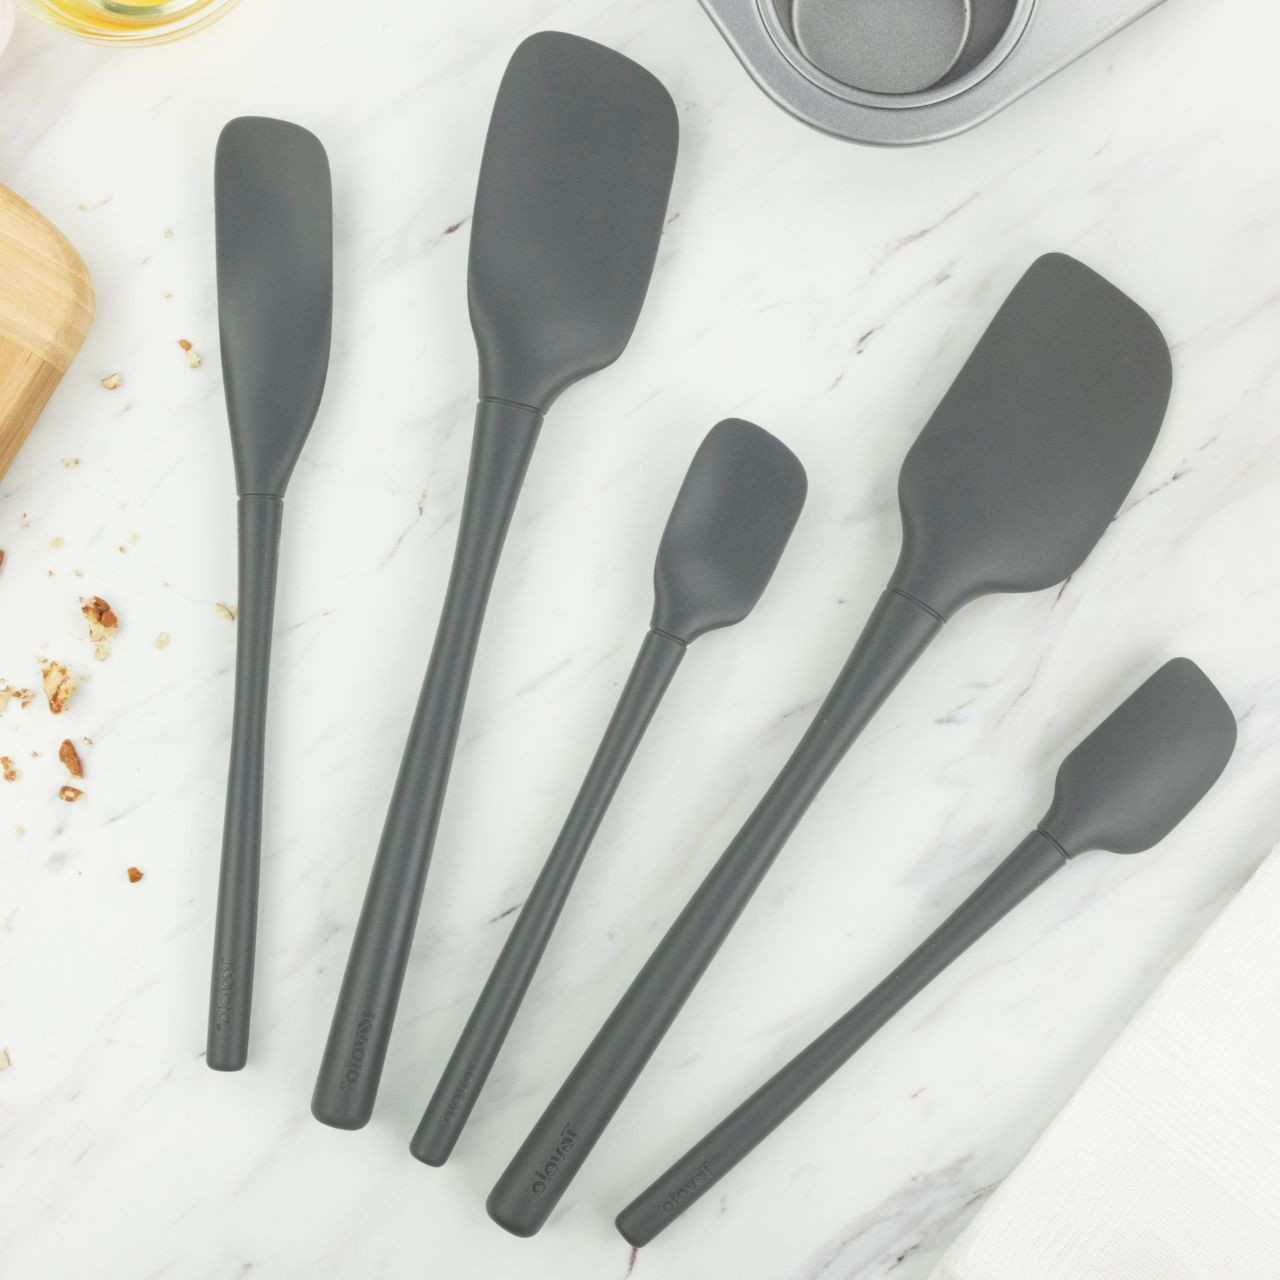 Tovolo Flex-Core Silicone Spatula with Stainless Steel Handle (Charcoal) -  Kitchen Utensil & Gadget …See more Tovolo Flex-Core Silicone Spatula with